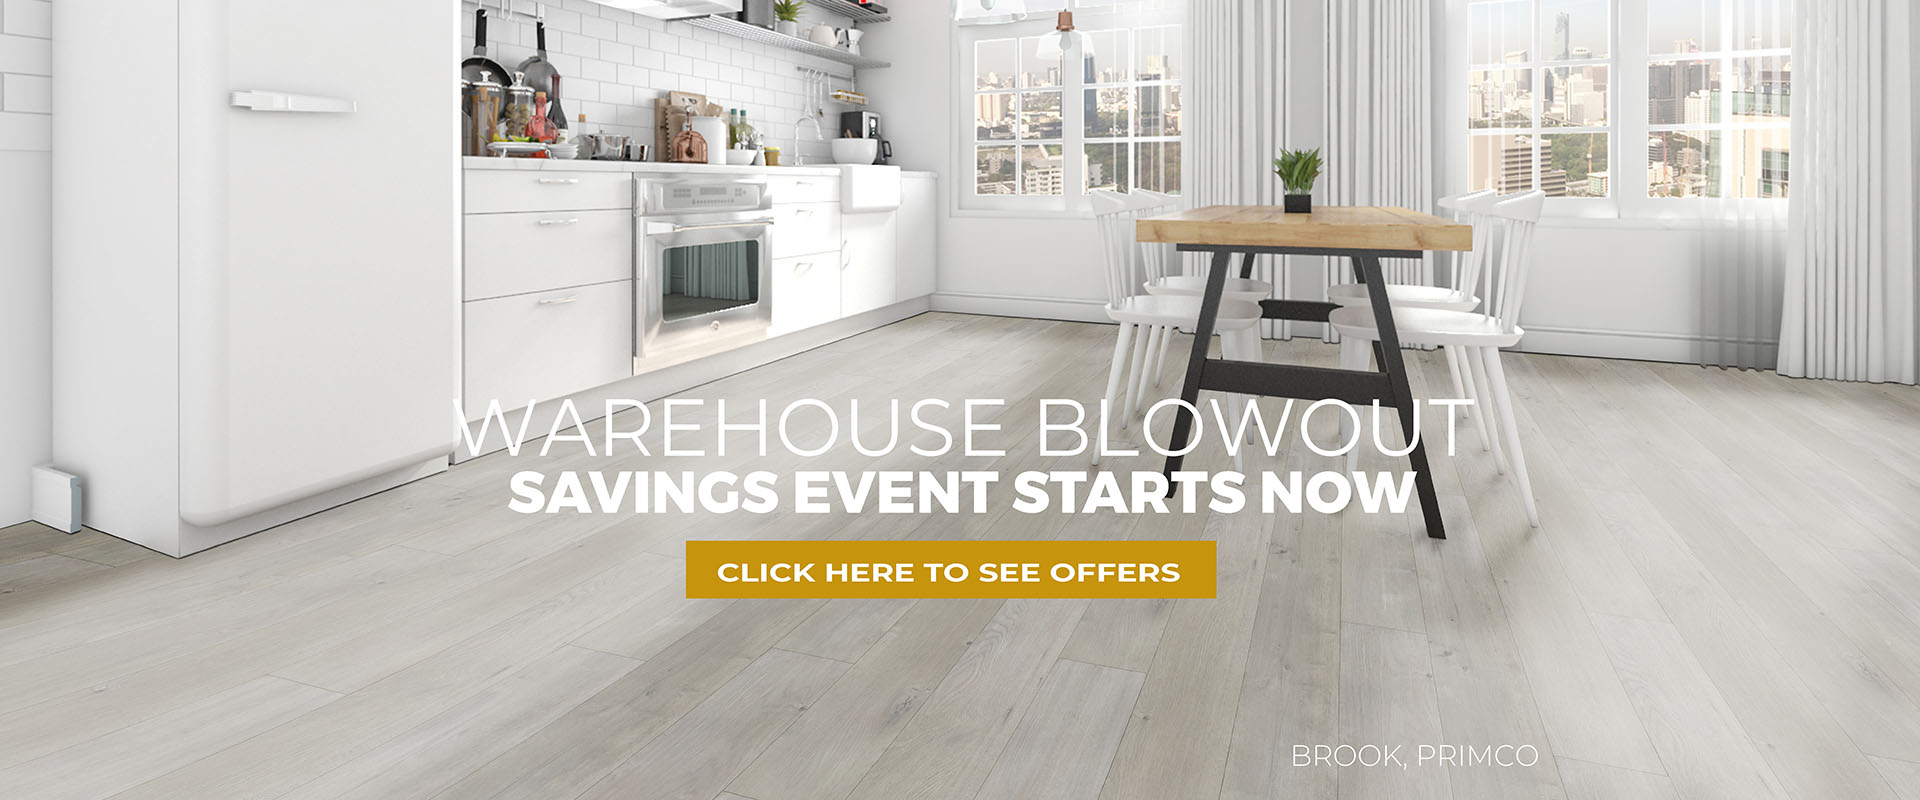 A banner that says "Warehouse Blowout Savings Event Starts Now".